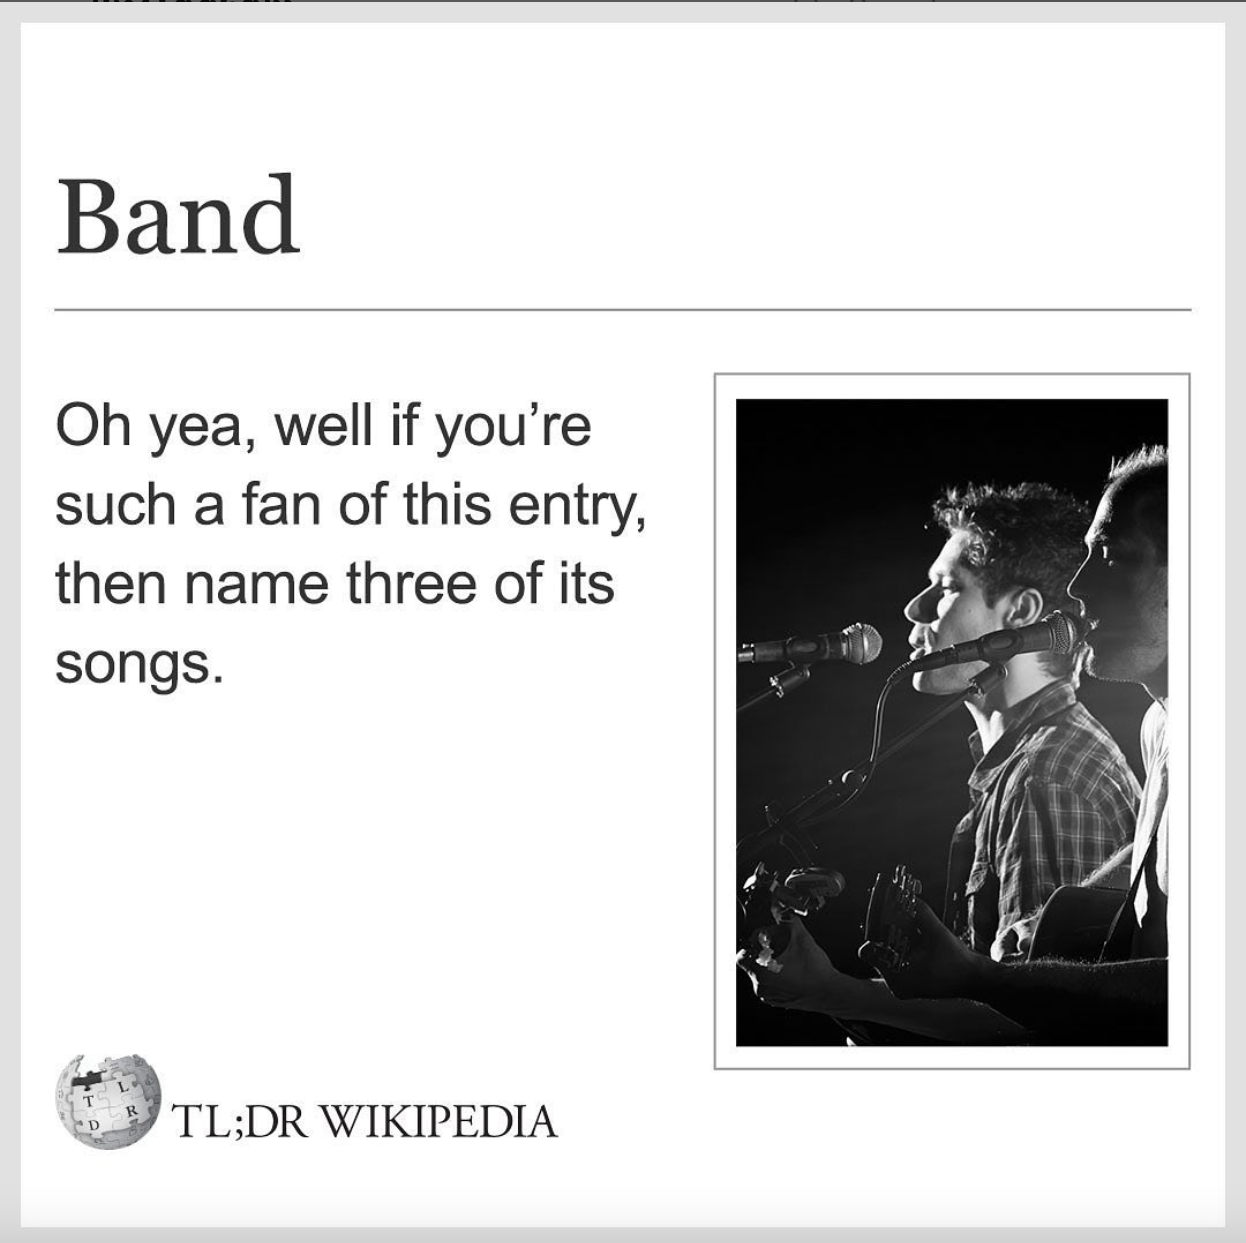 Wikipedia Memes - multimedia - Band Oh yea, well if you're such a fan of this entry, then name three of its songs. Tl;Dr Wikipedia